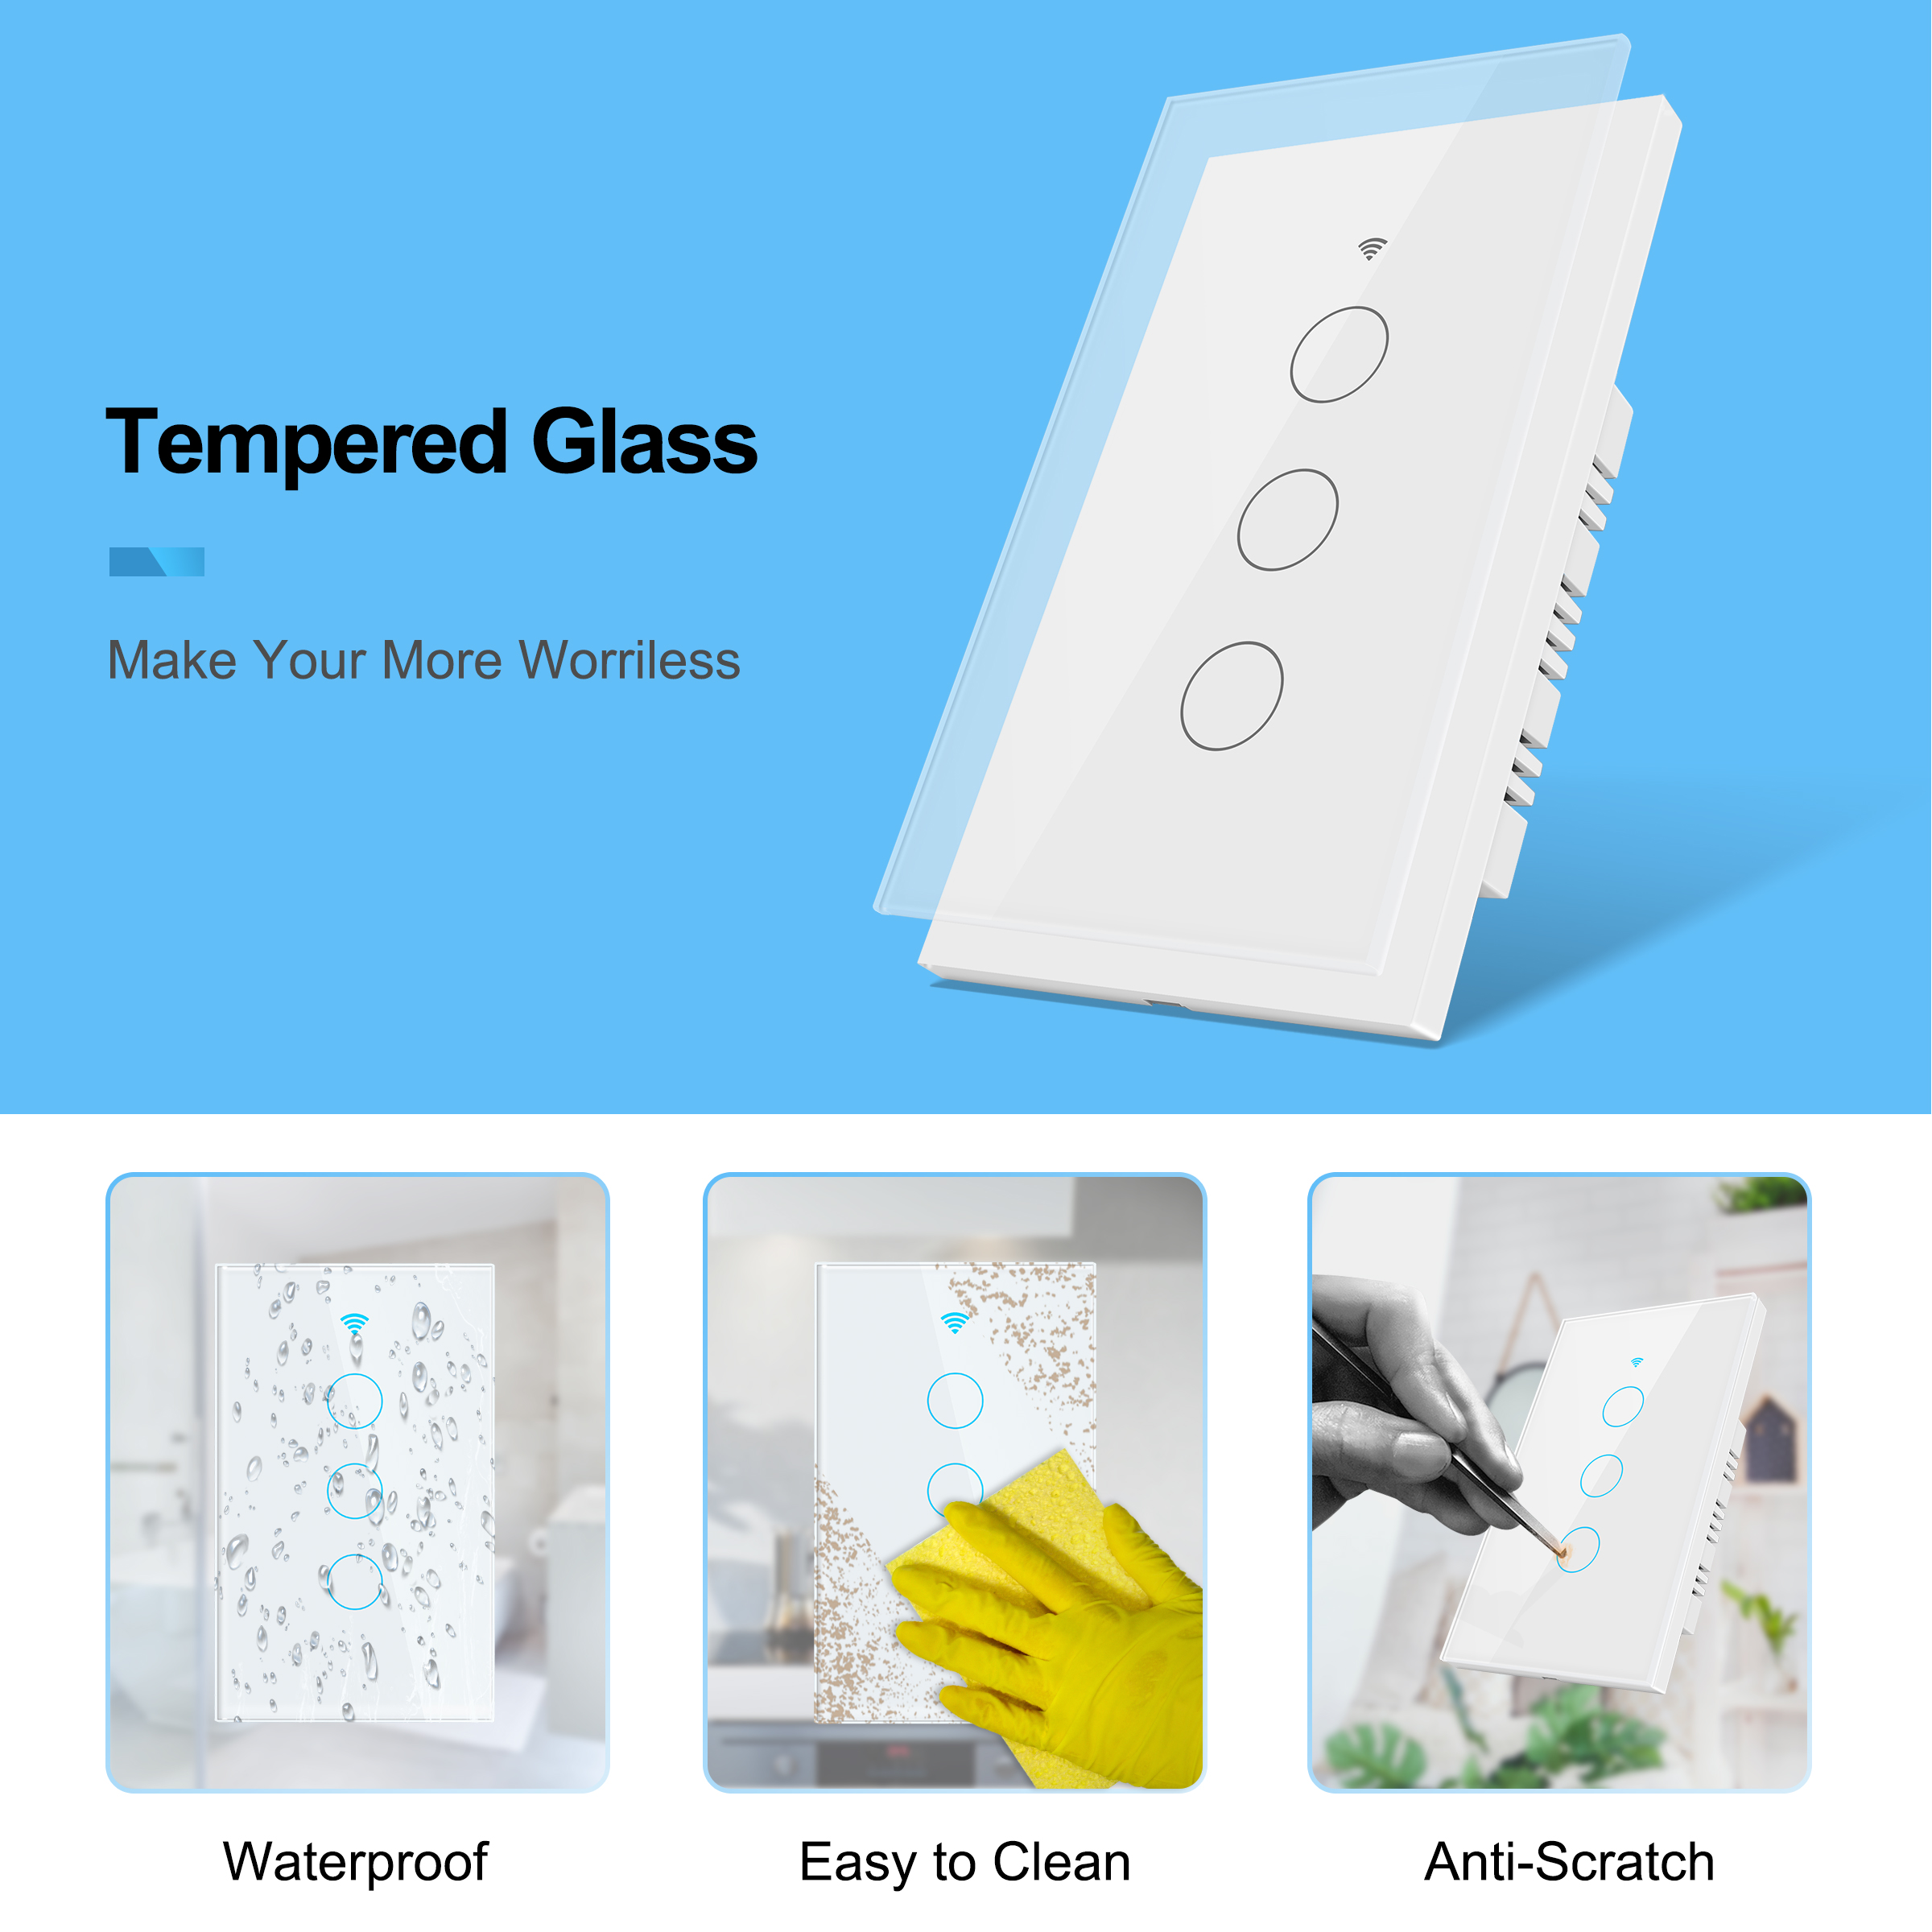 Tuya Smart Wifi Touch Light Switch US, Smart Home Wall Switch 1 2 3 Gang with Sensitive Touch Panel, Work with Alexa Google Home